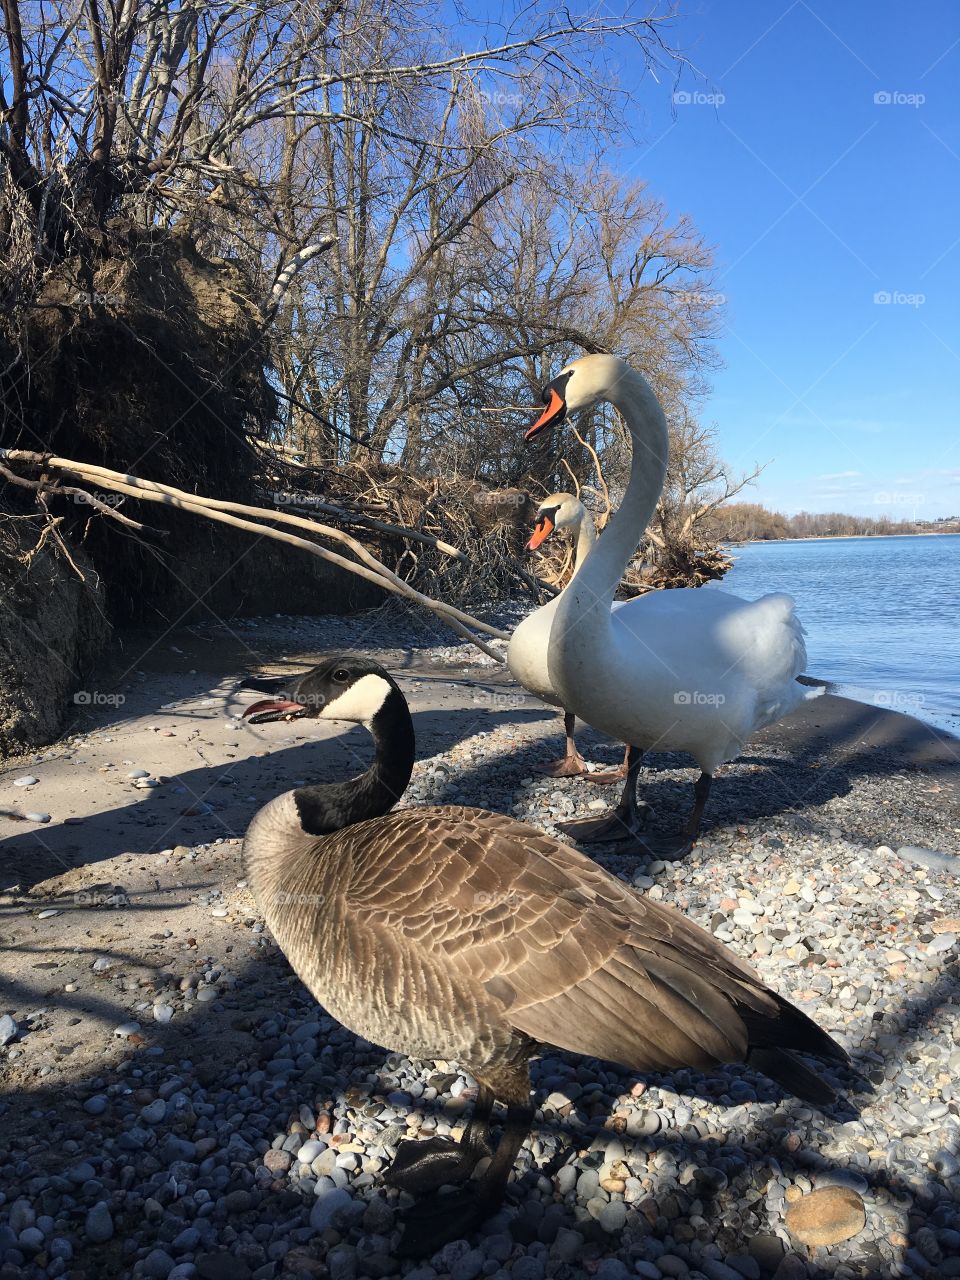 Mated swans with an angry Canadian goose. The Canadian goose is hissing, and with that you can see his tongue. At a conservation area in late winter, bare trees and water shown.